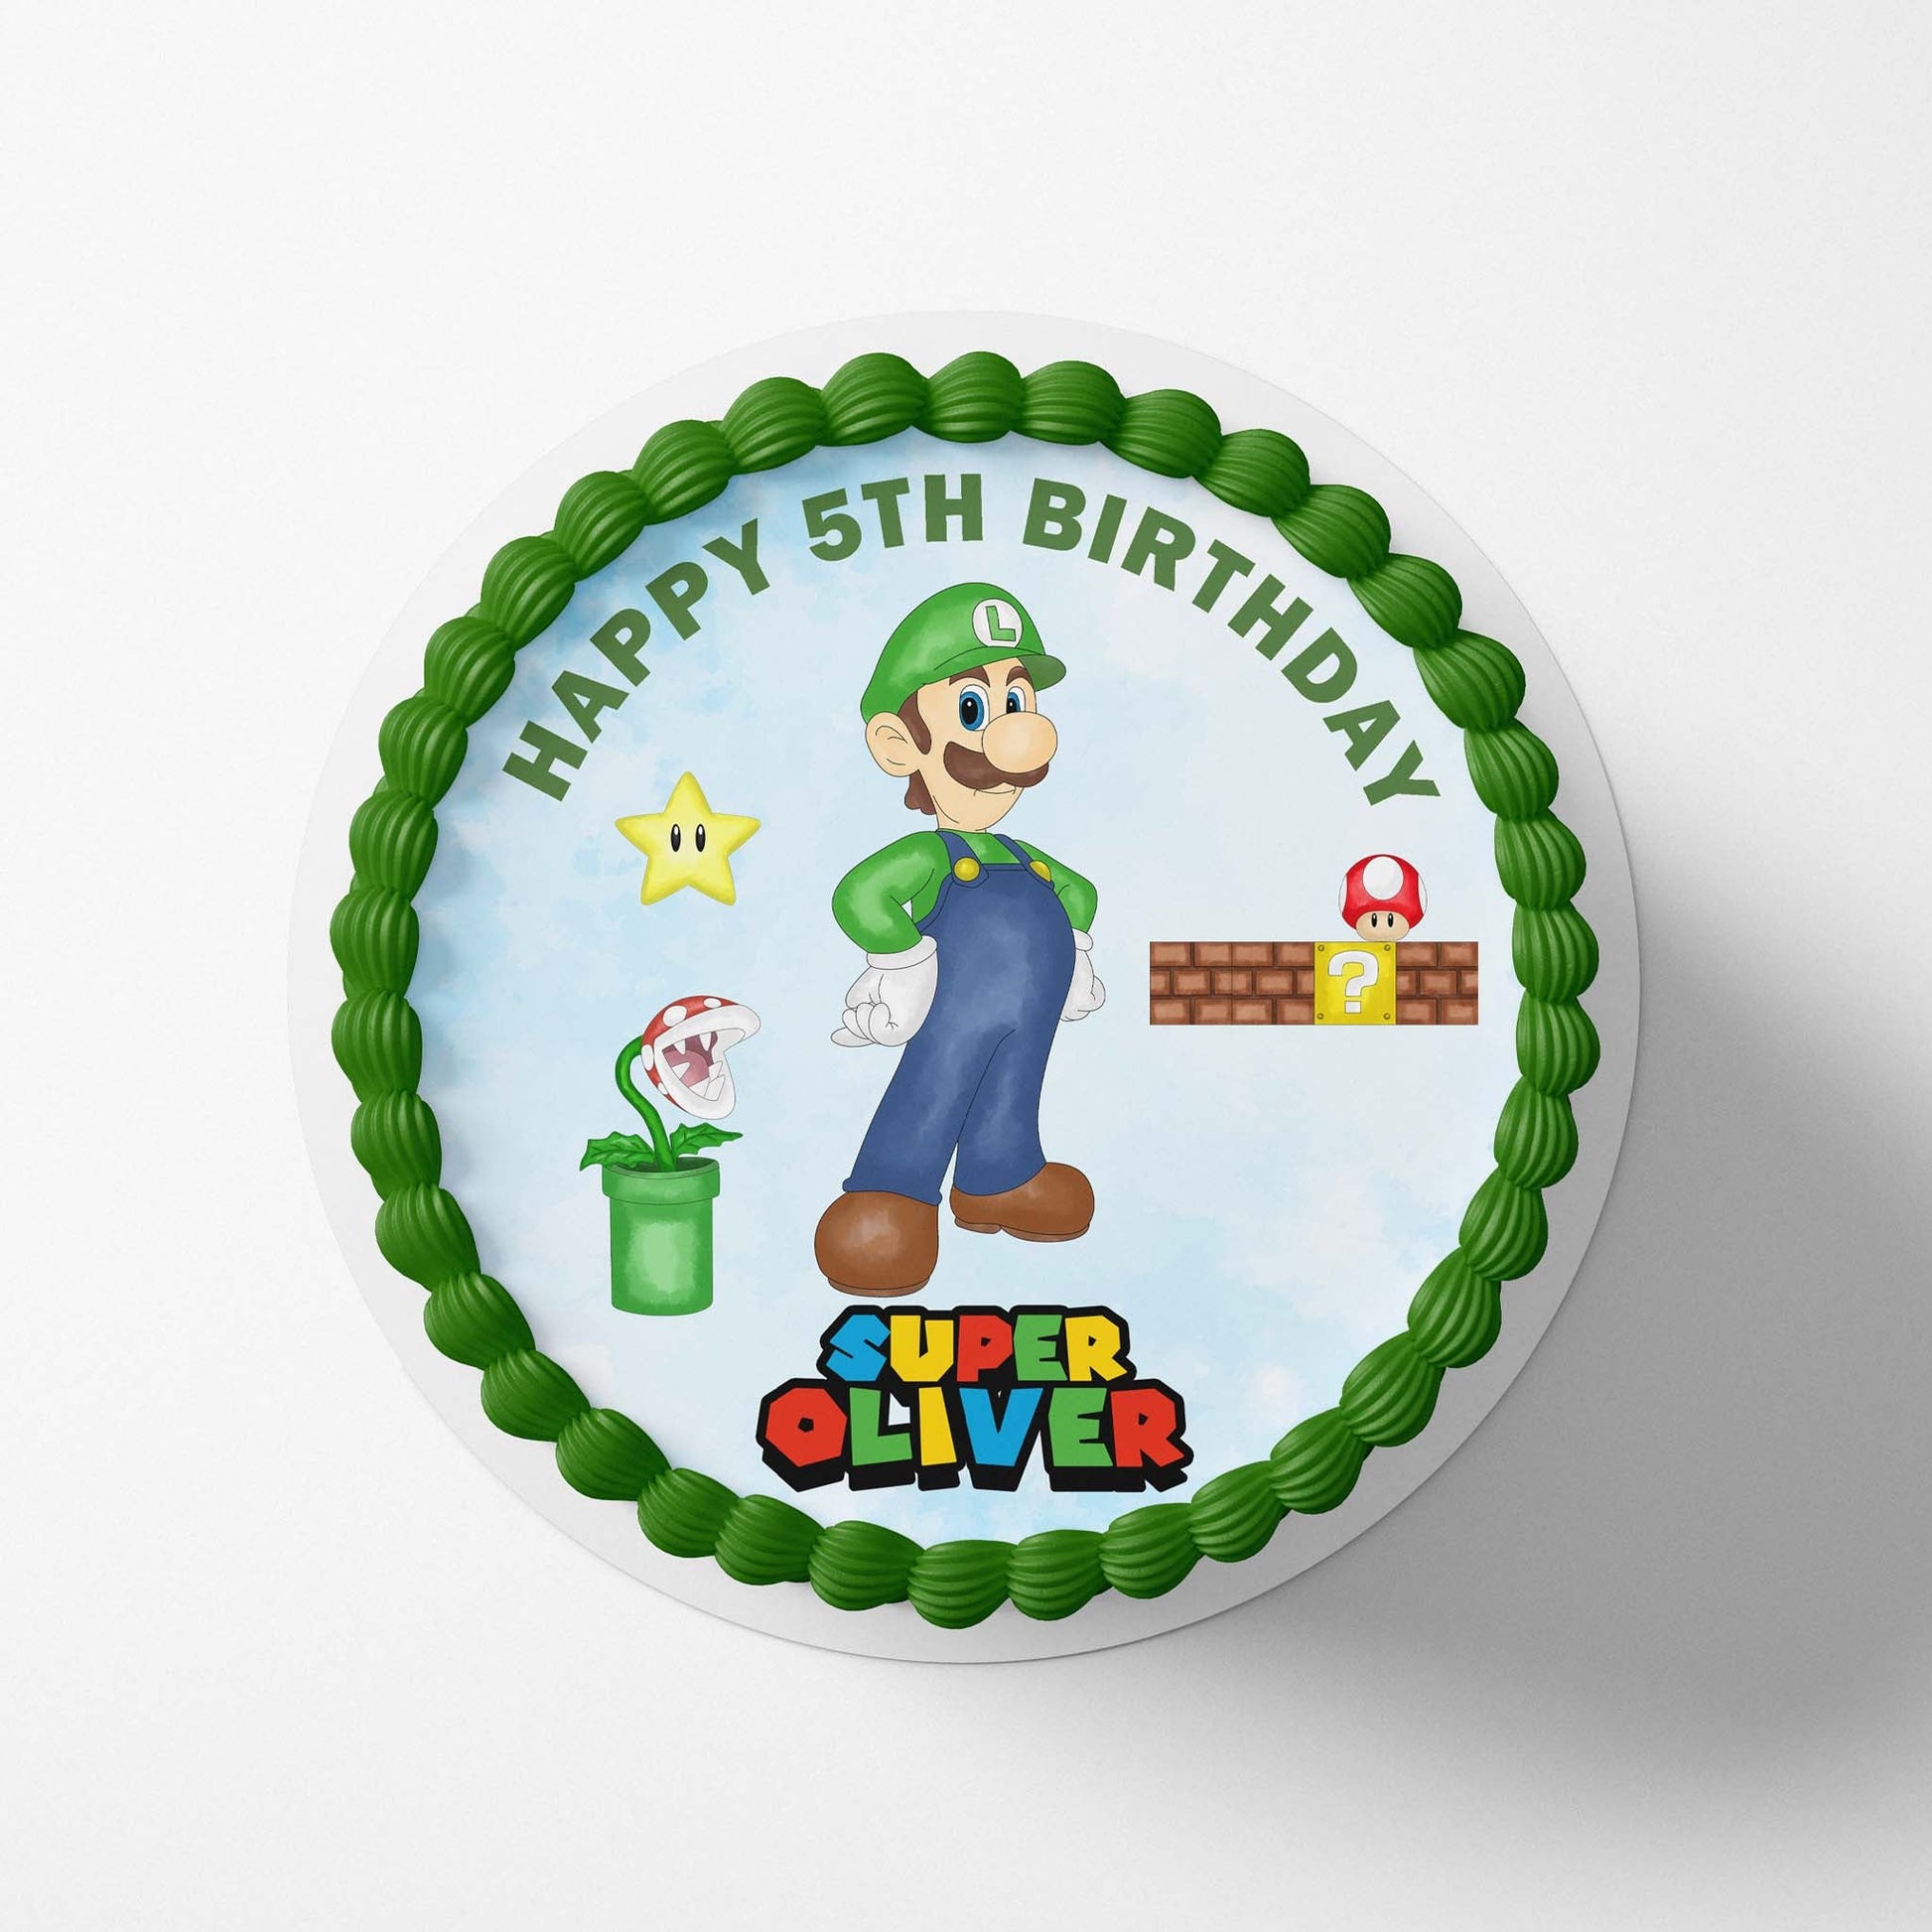 Luigi - Super Mario Bothers - Edible Icing Toppers - printsoncakes - Edible Image service provider